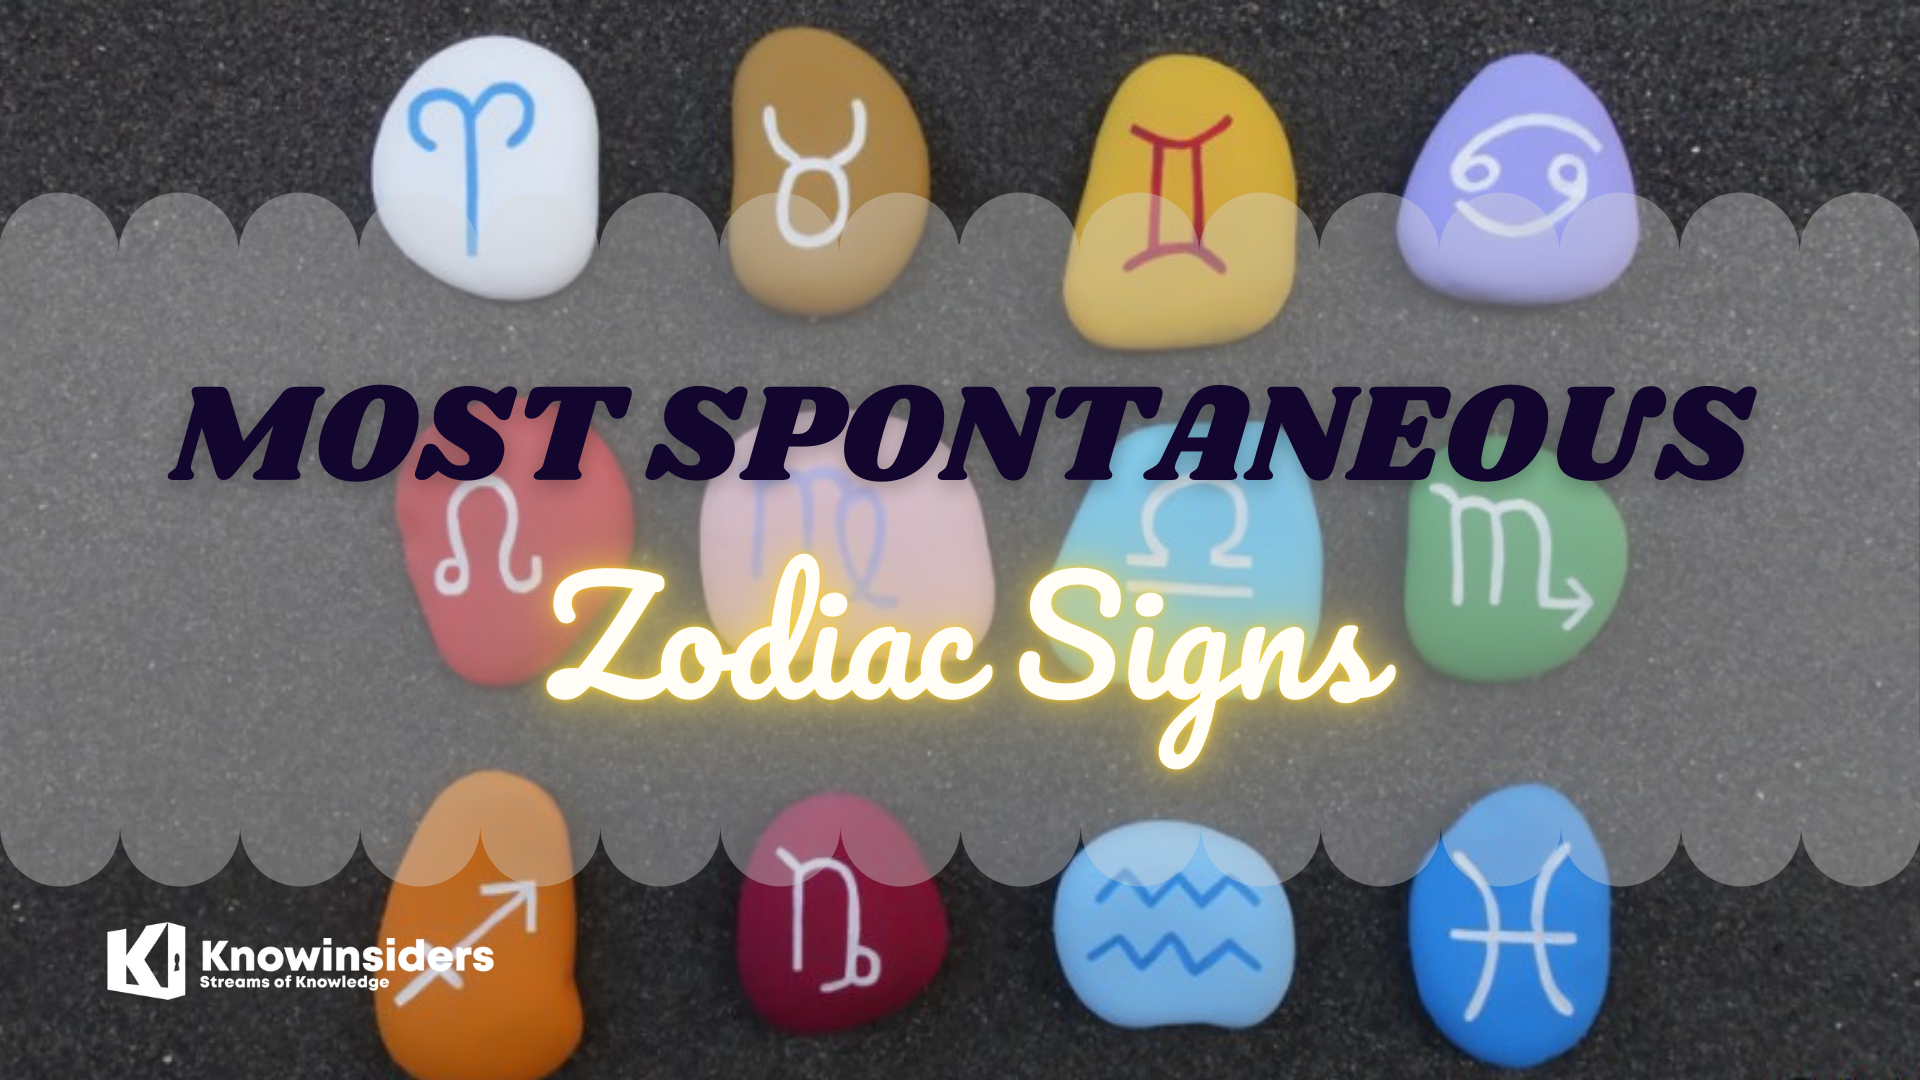 Top 5 Most Spontaneous Zodiac Signs According To Astrology